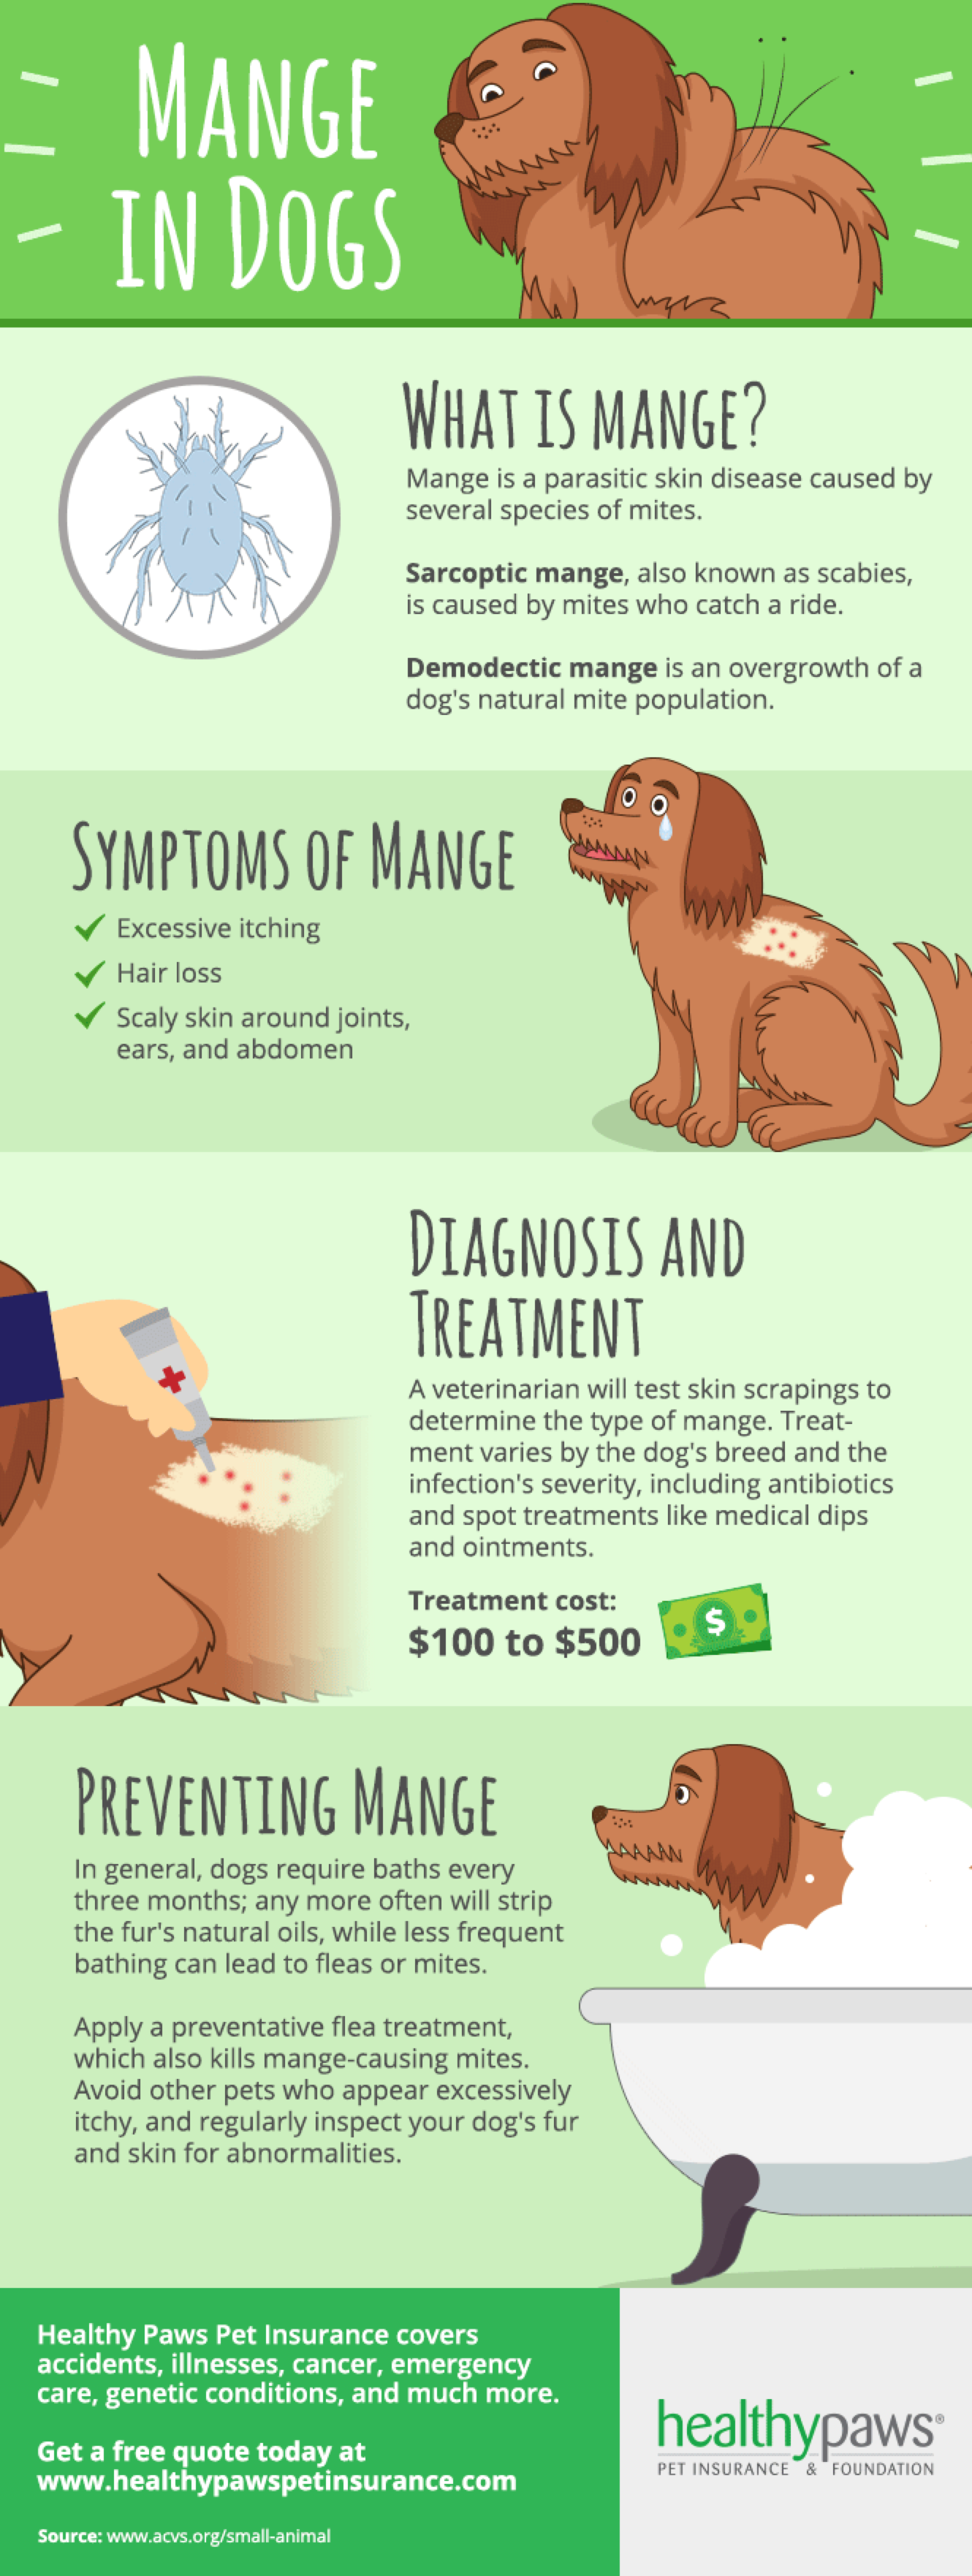 How To Treat Mange in Dogs | Healthy 